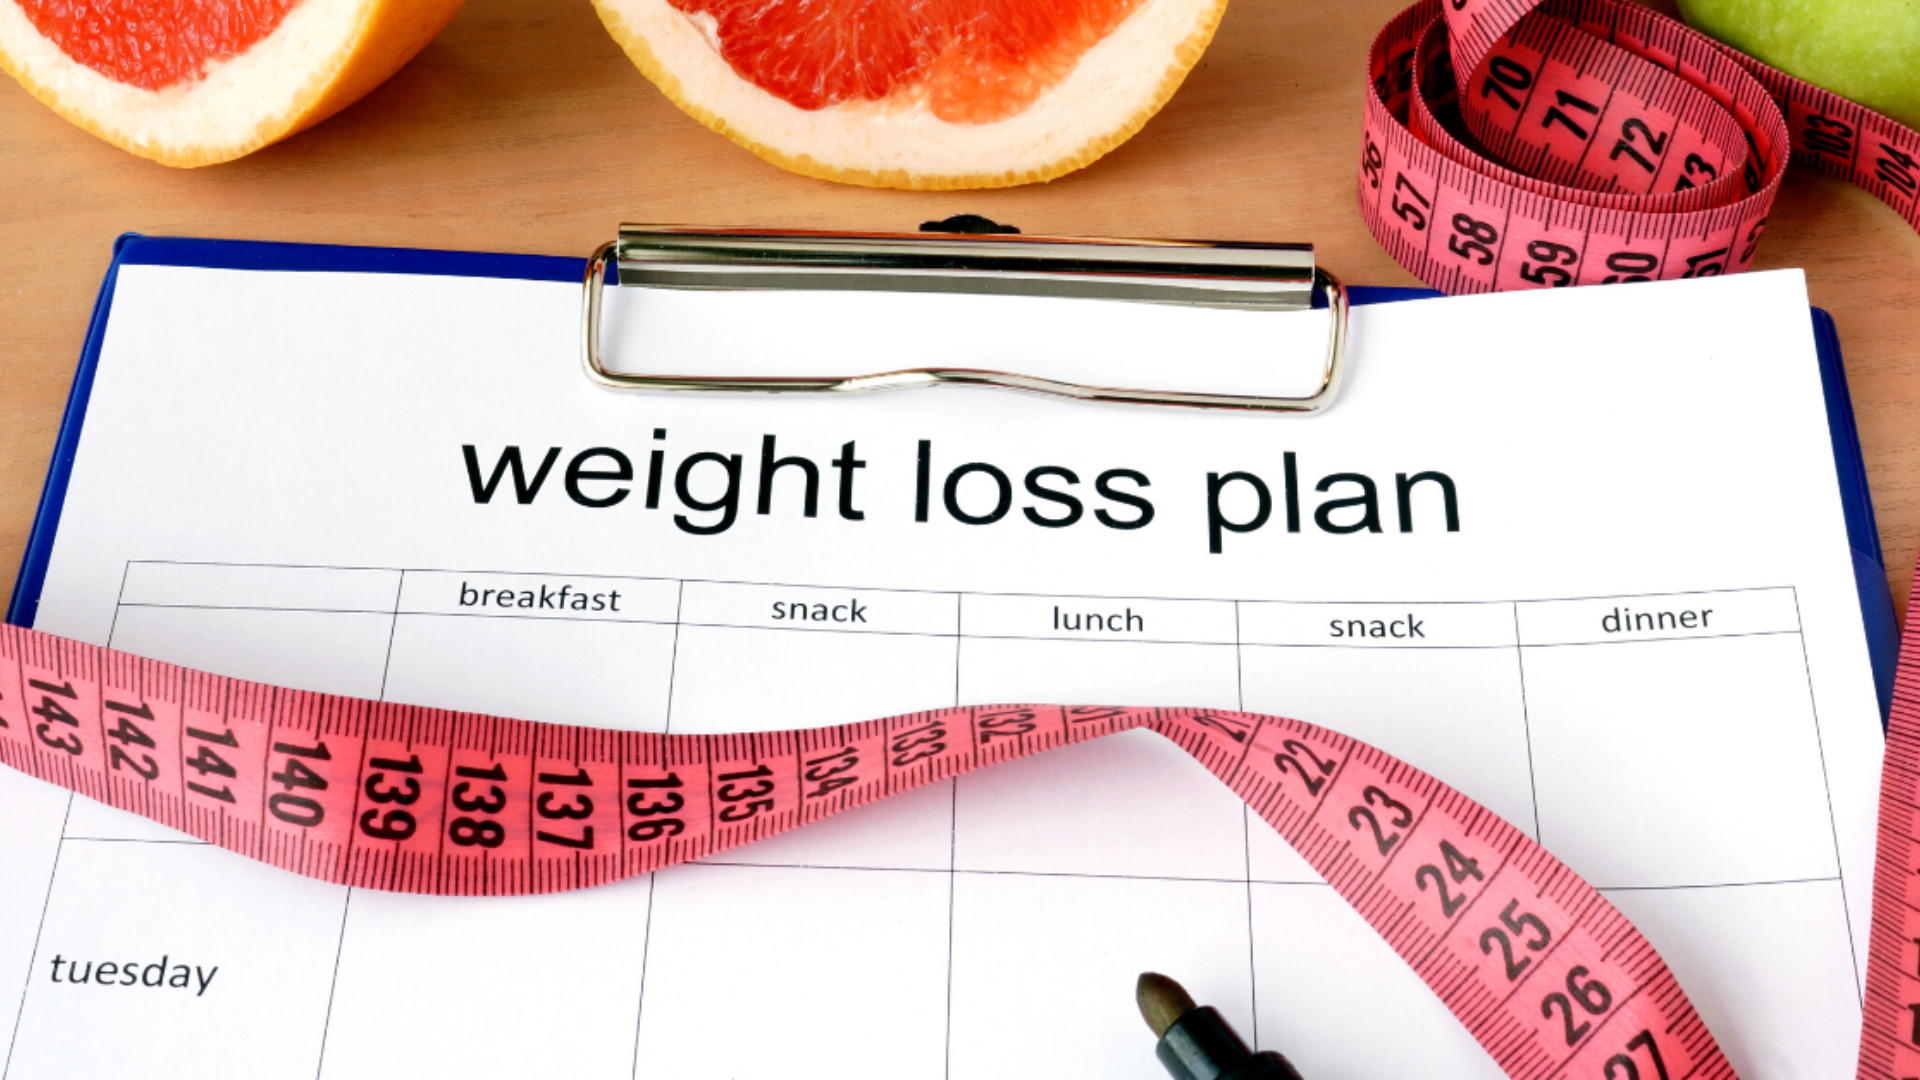 Free Weight Loss Plan: How to Achieve Your Goals Naturally